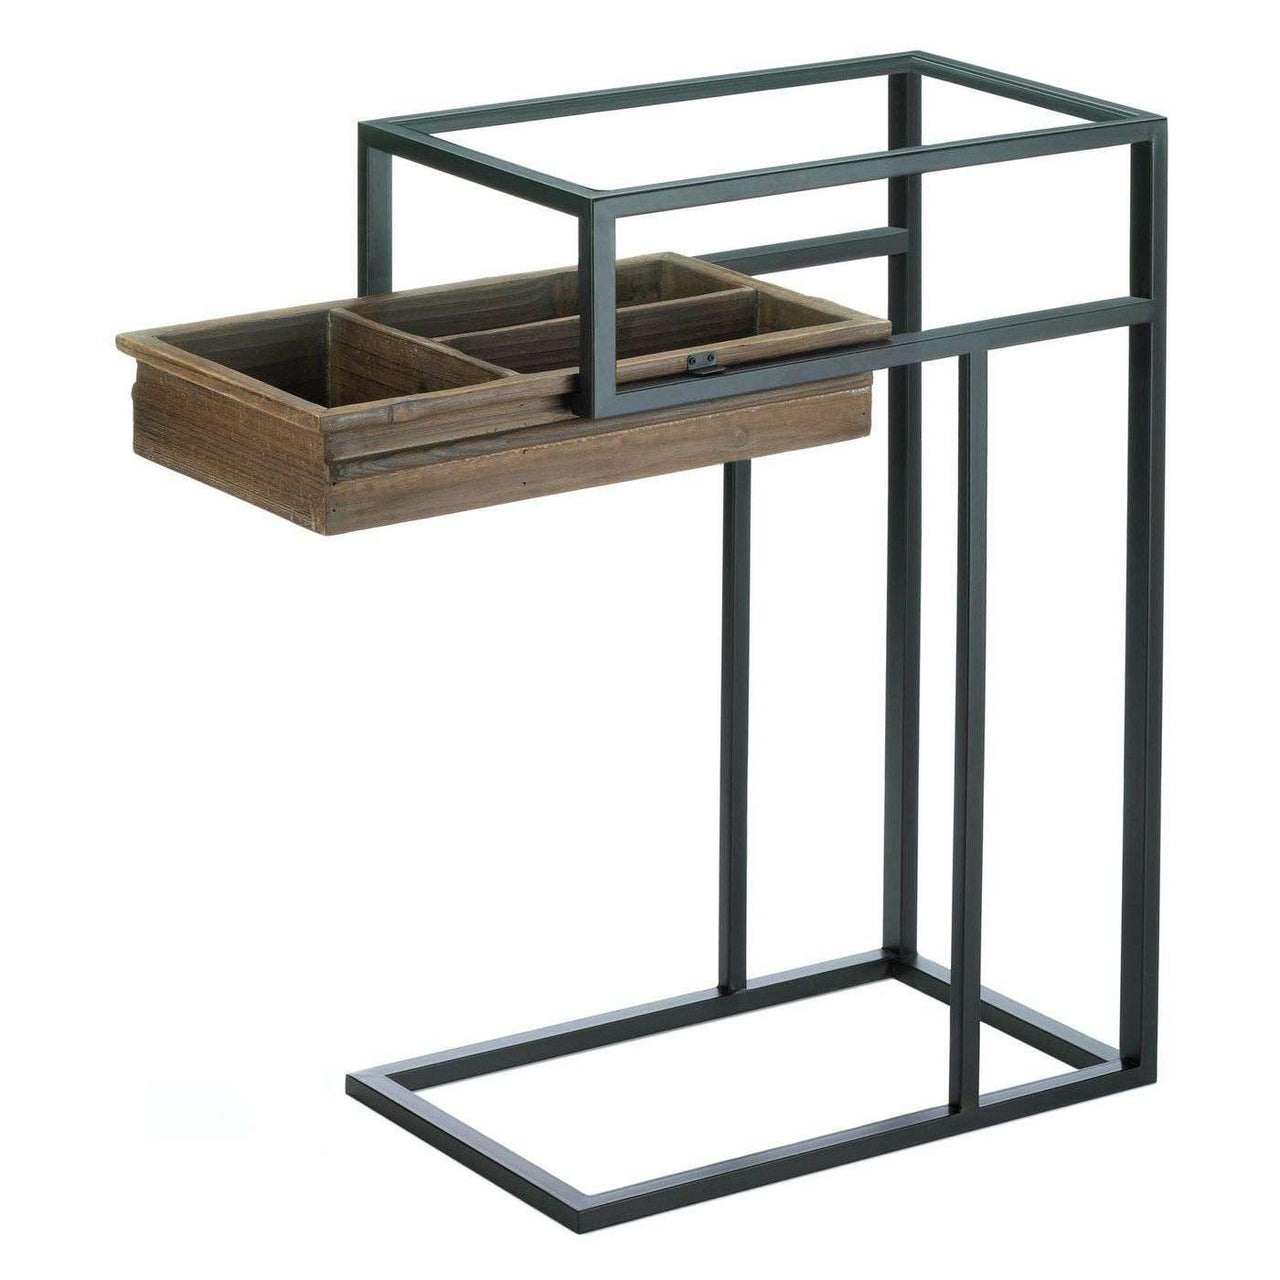 Side Table With Slide Out Drawer - The Fox Decor